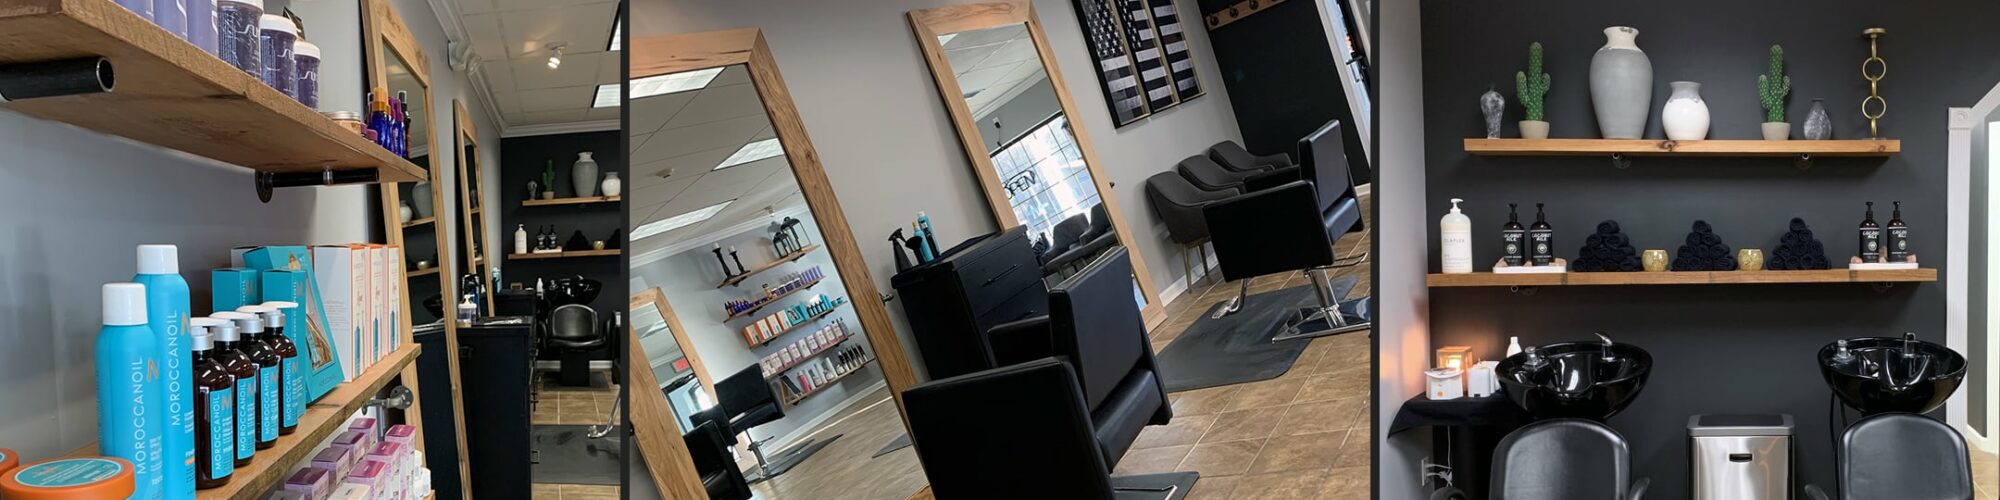 interior view of salon dior. products on wooden shelves, leather stylist chair, full length mirrors, grey walls and tan tile flooring.